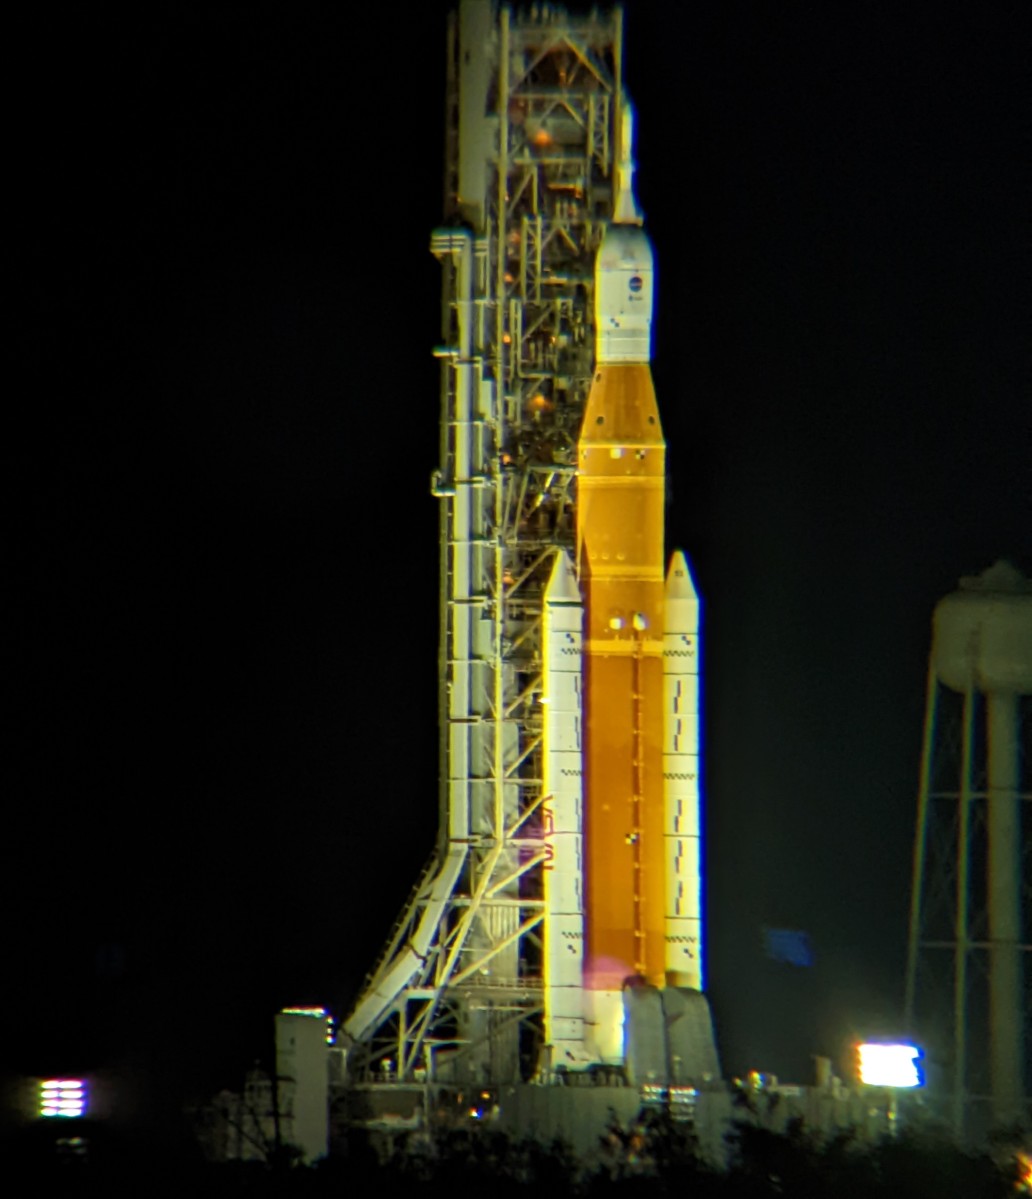 An image of the Space Launch System rocket from the Artemis 1 mission on the launch pad 3.2 miles (5.14 km) away, seen through Celestron Skymaster binoculars.